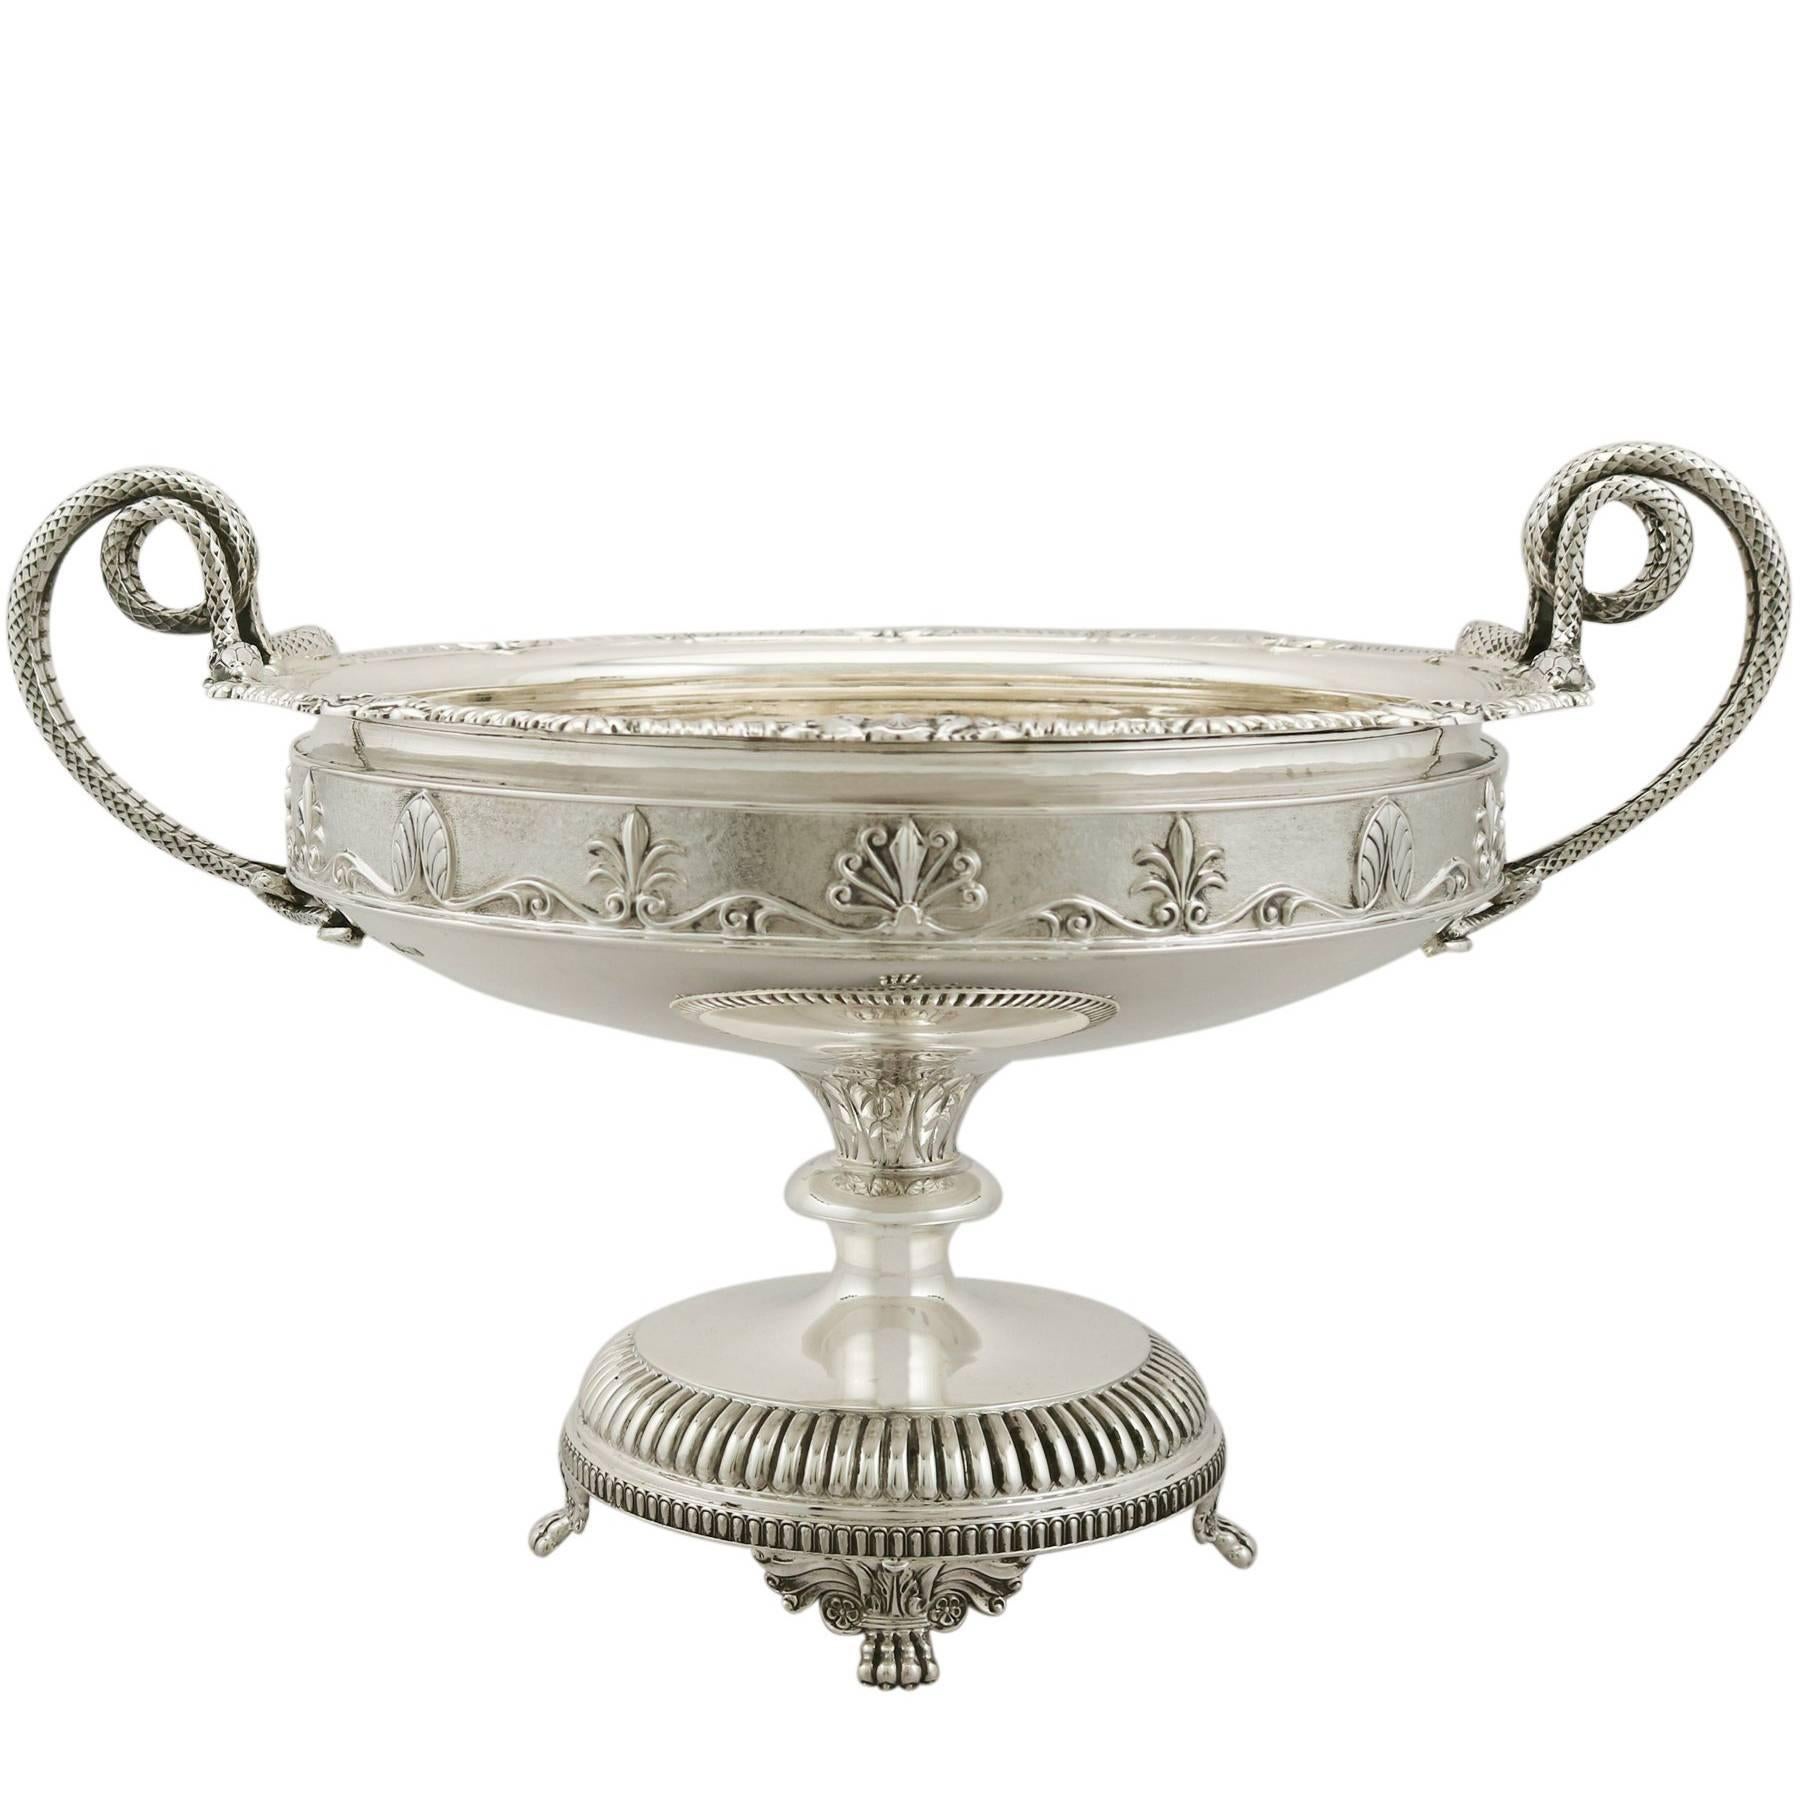 1920s Antique Sterling Silver Presentation Bowl by James Dixon & Sons